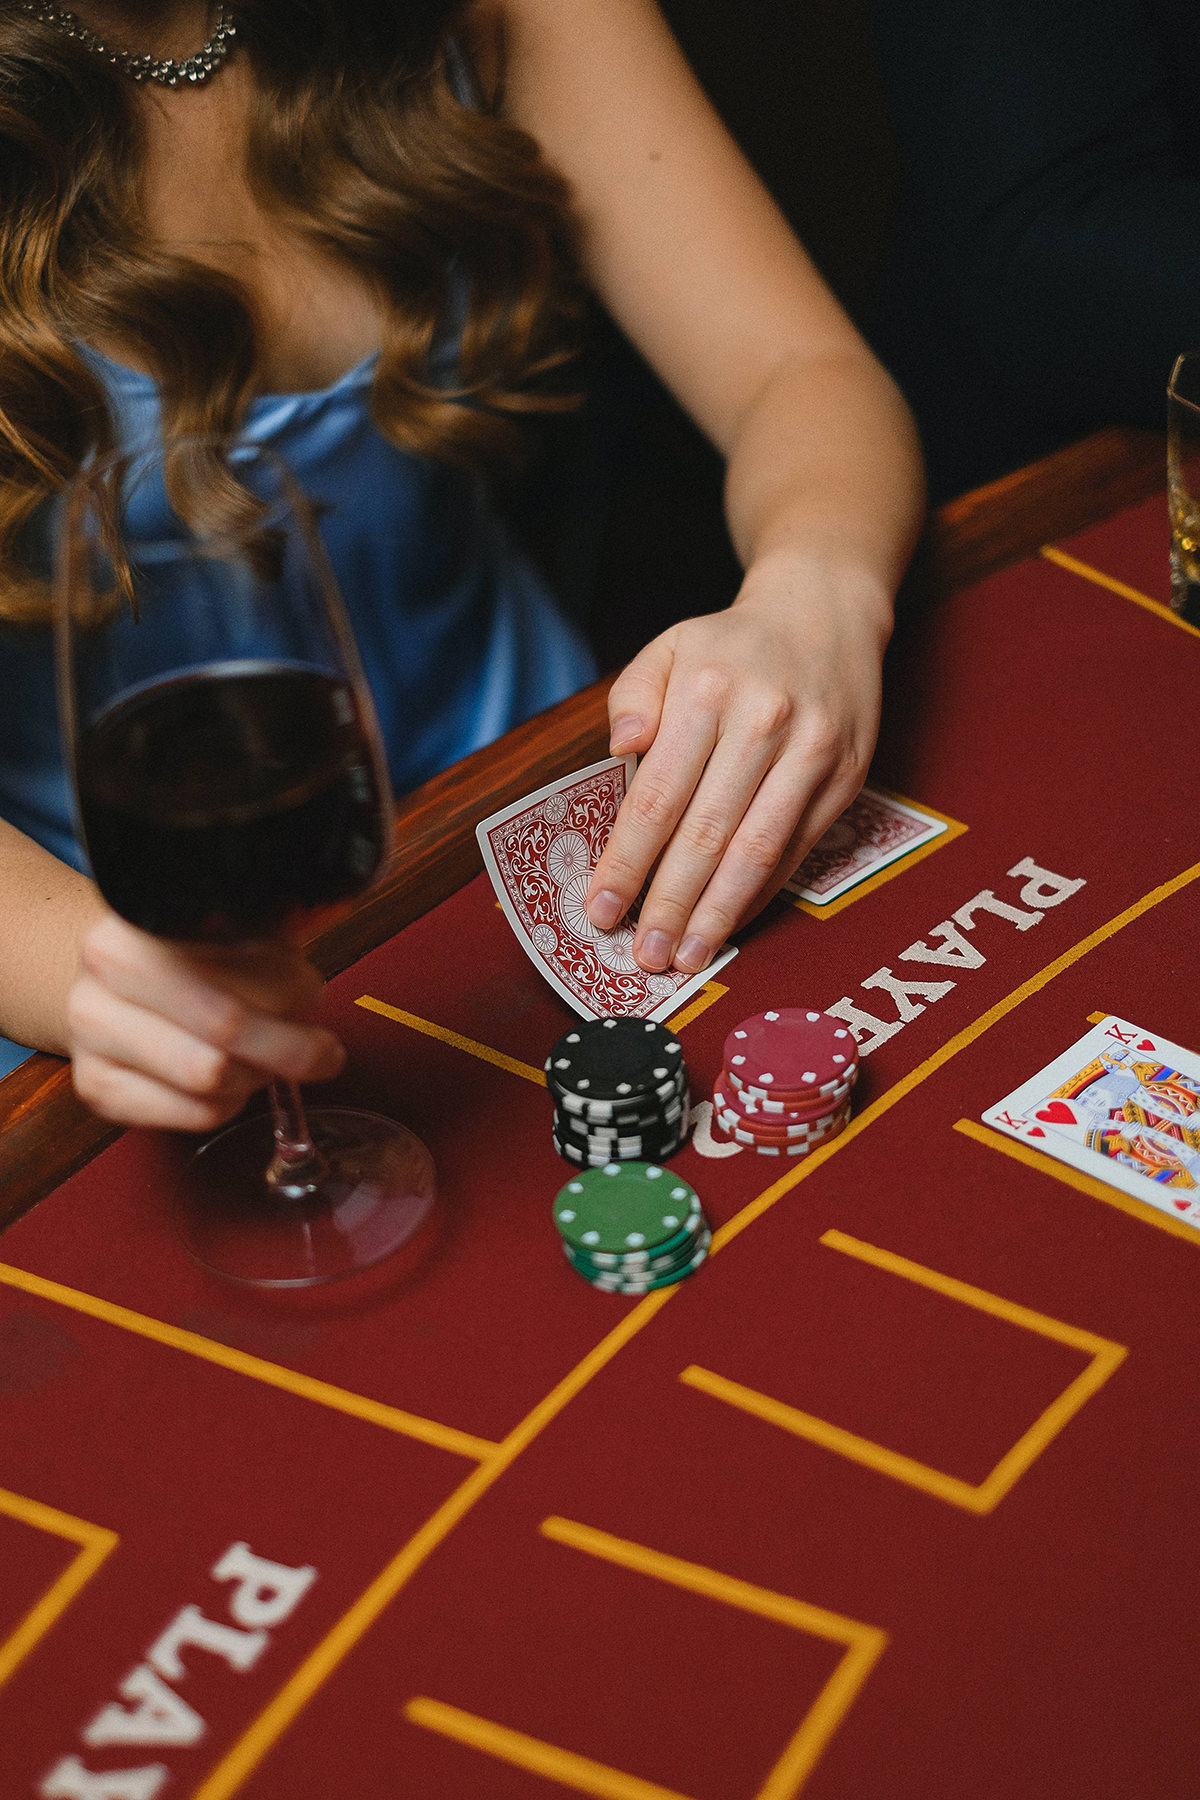 cryptocurrency casinos 2.0 - The Next Step